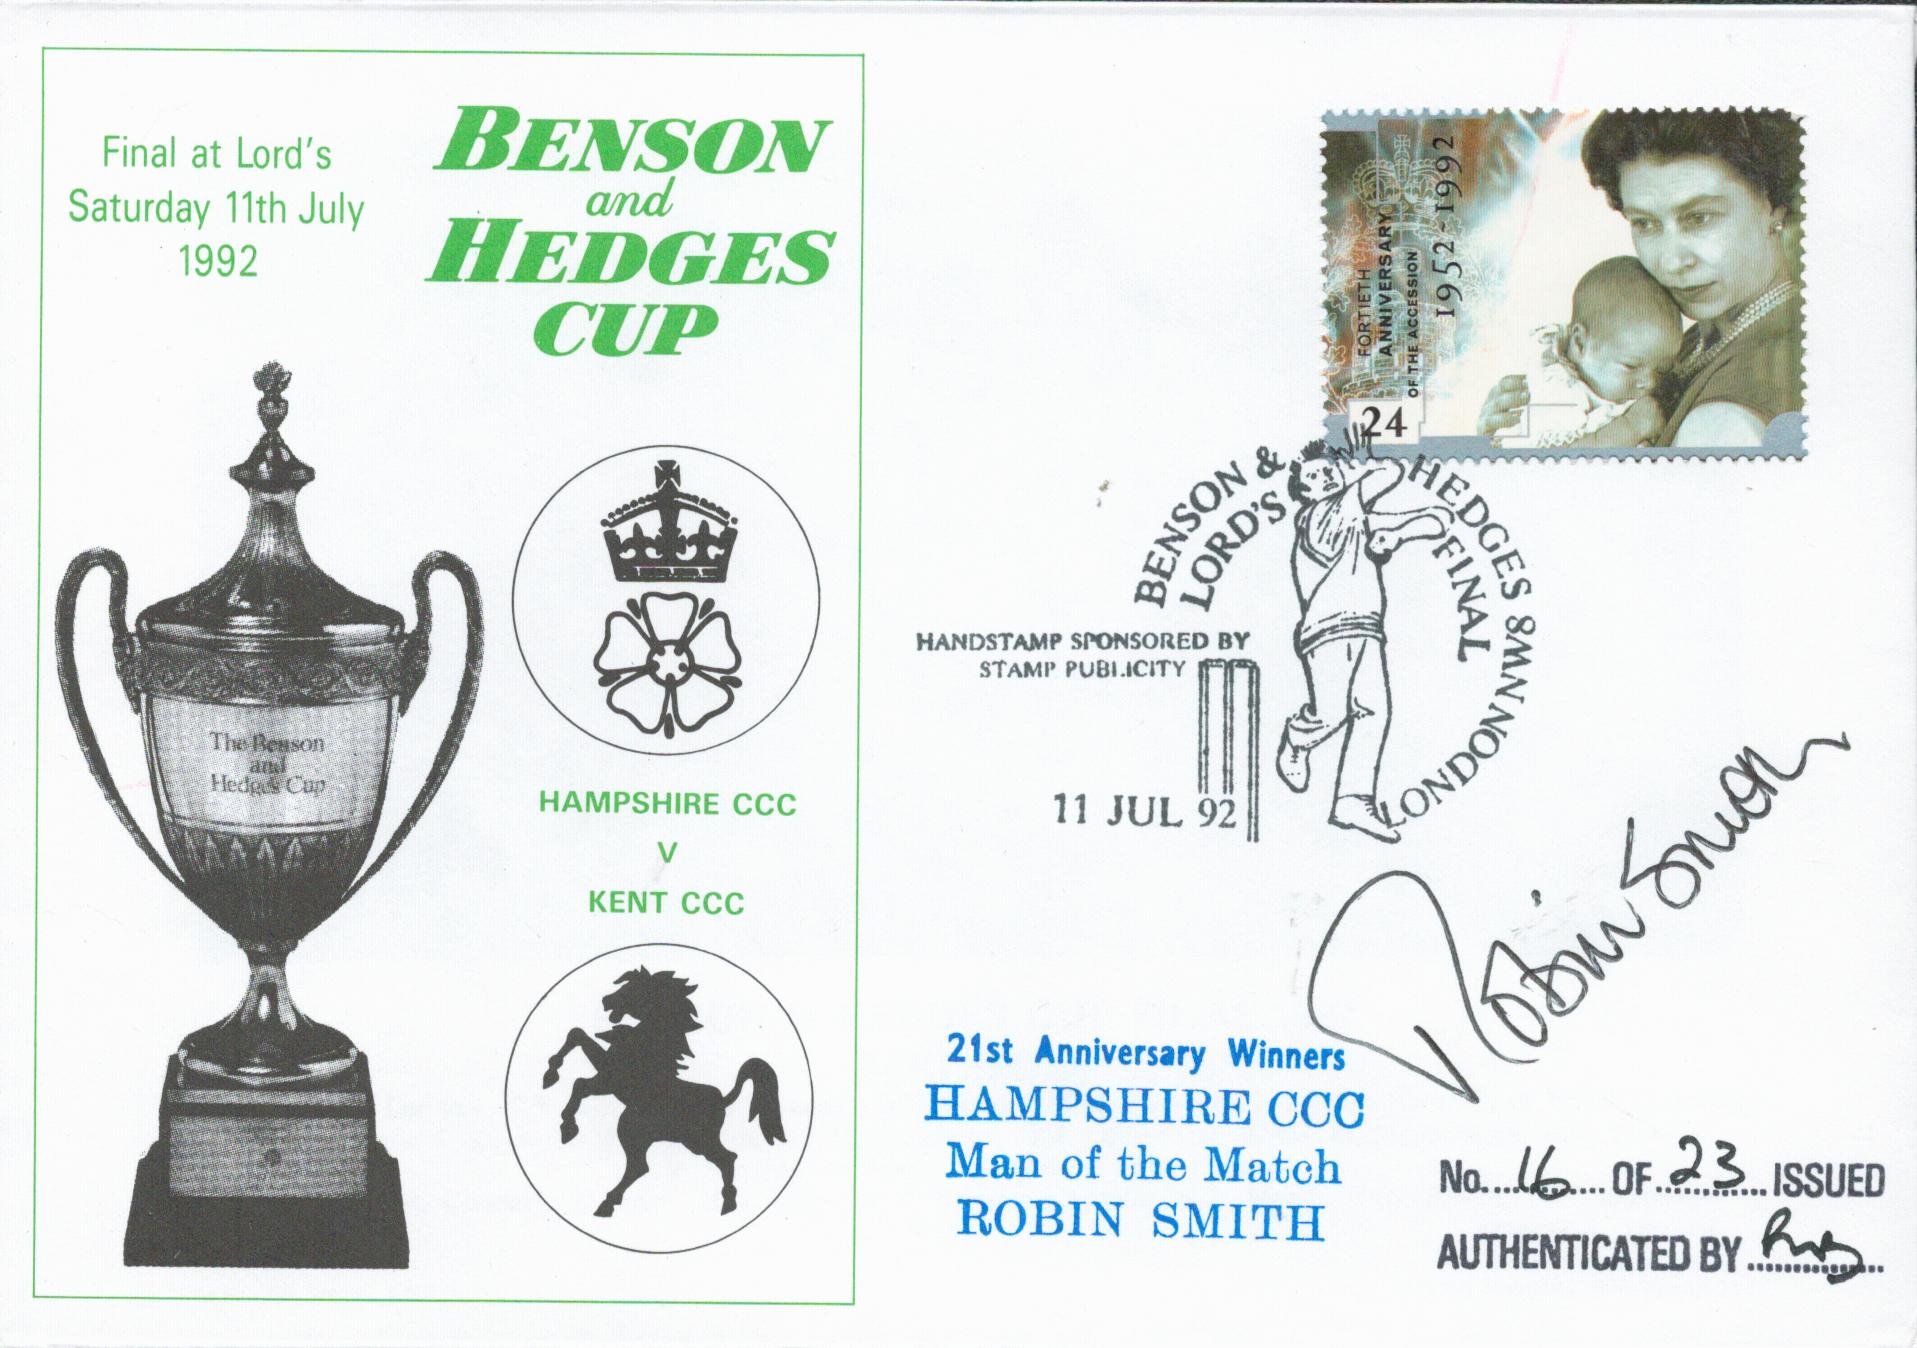 Cricket English Cricketer Robin Smith Signed Benson and Hedges Cup. 16 of 23 Covers Issued. Final At